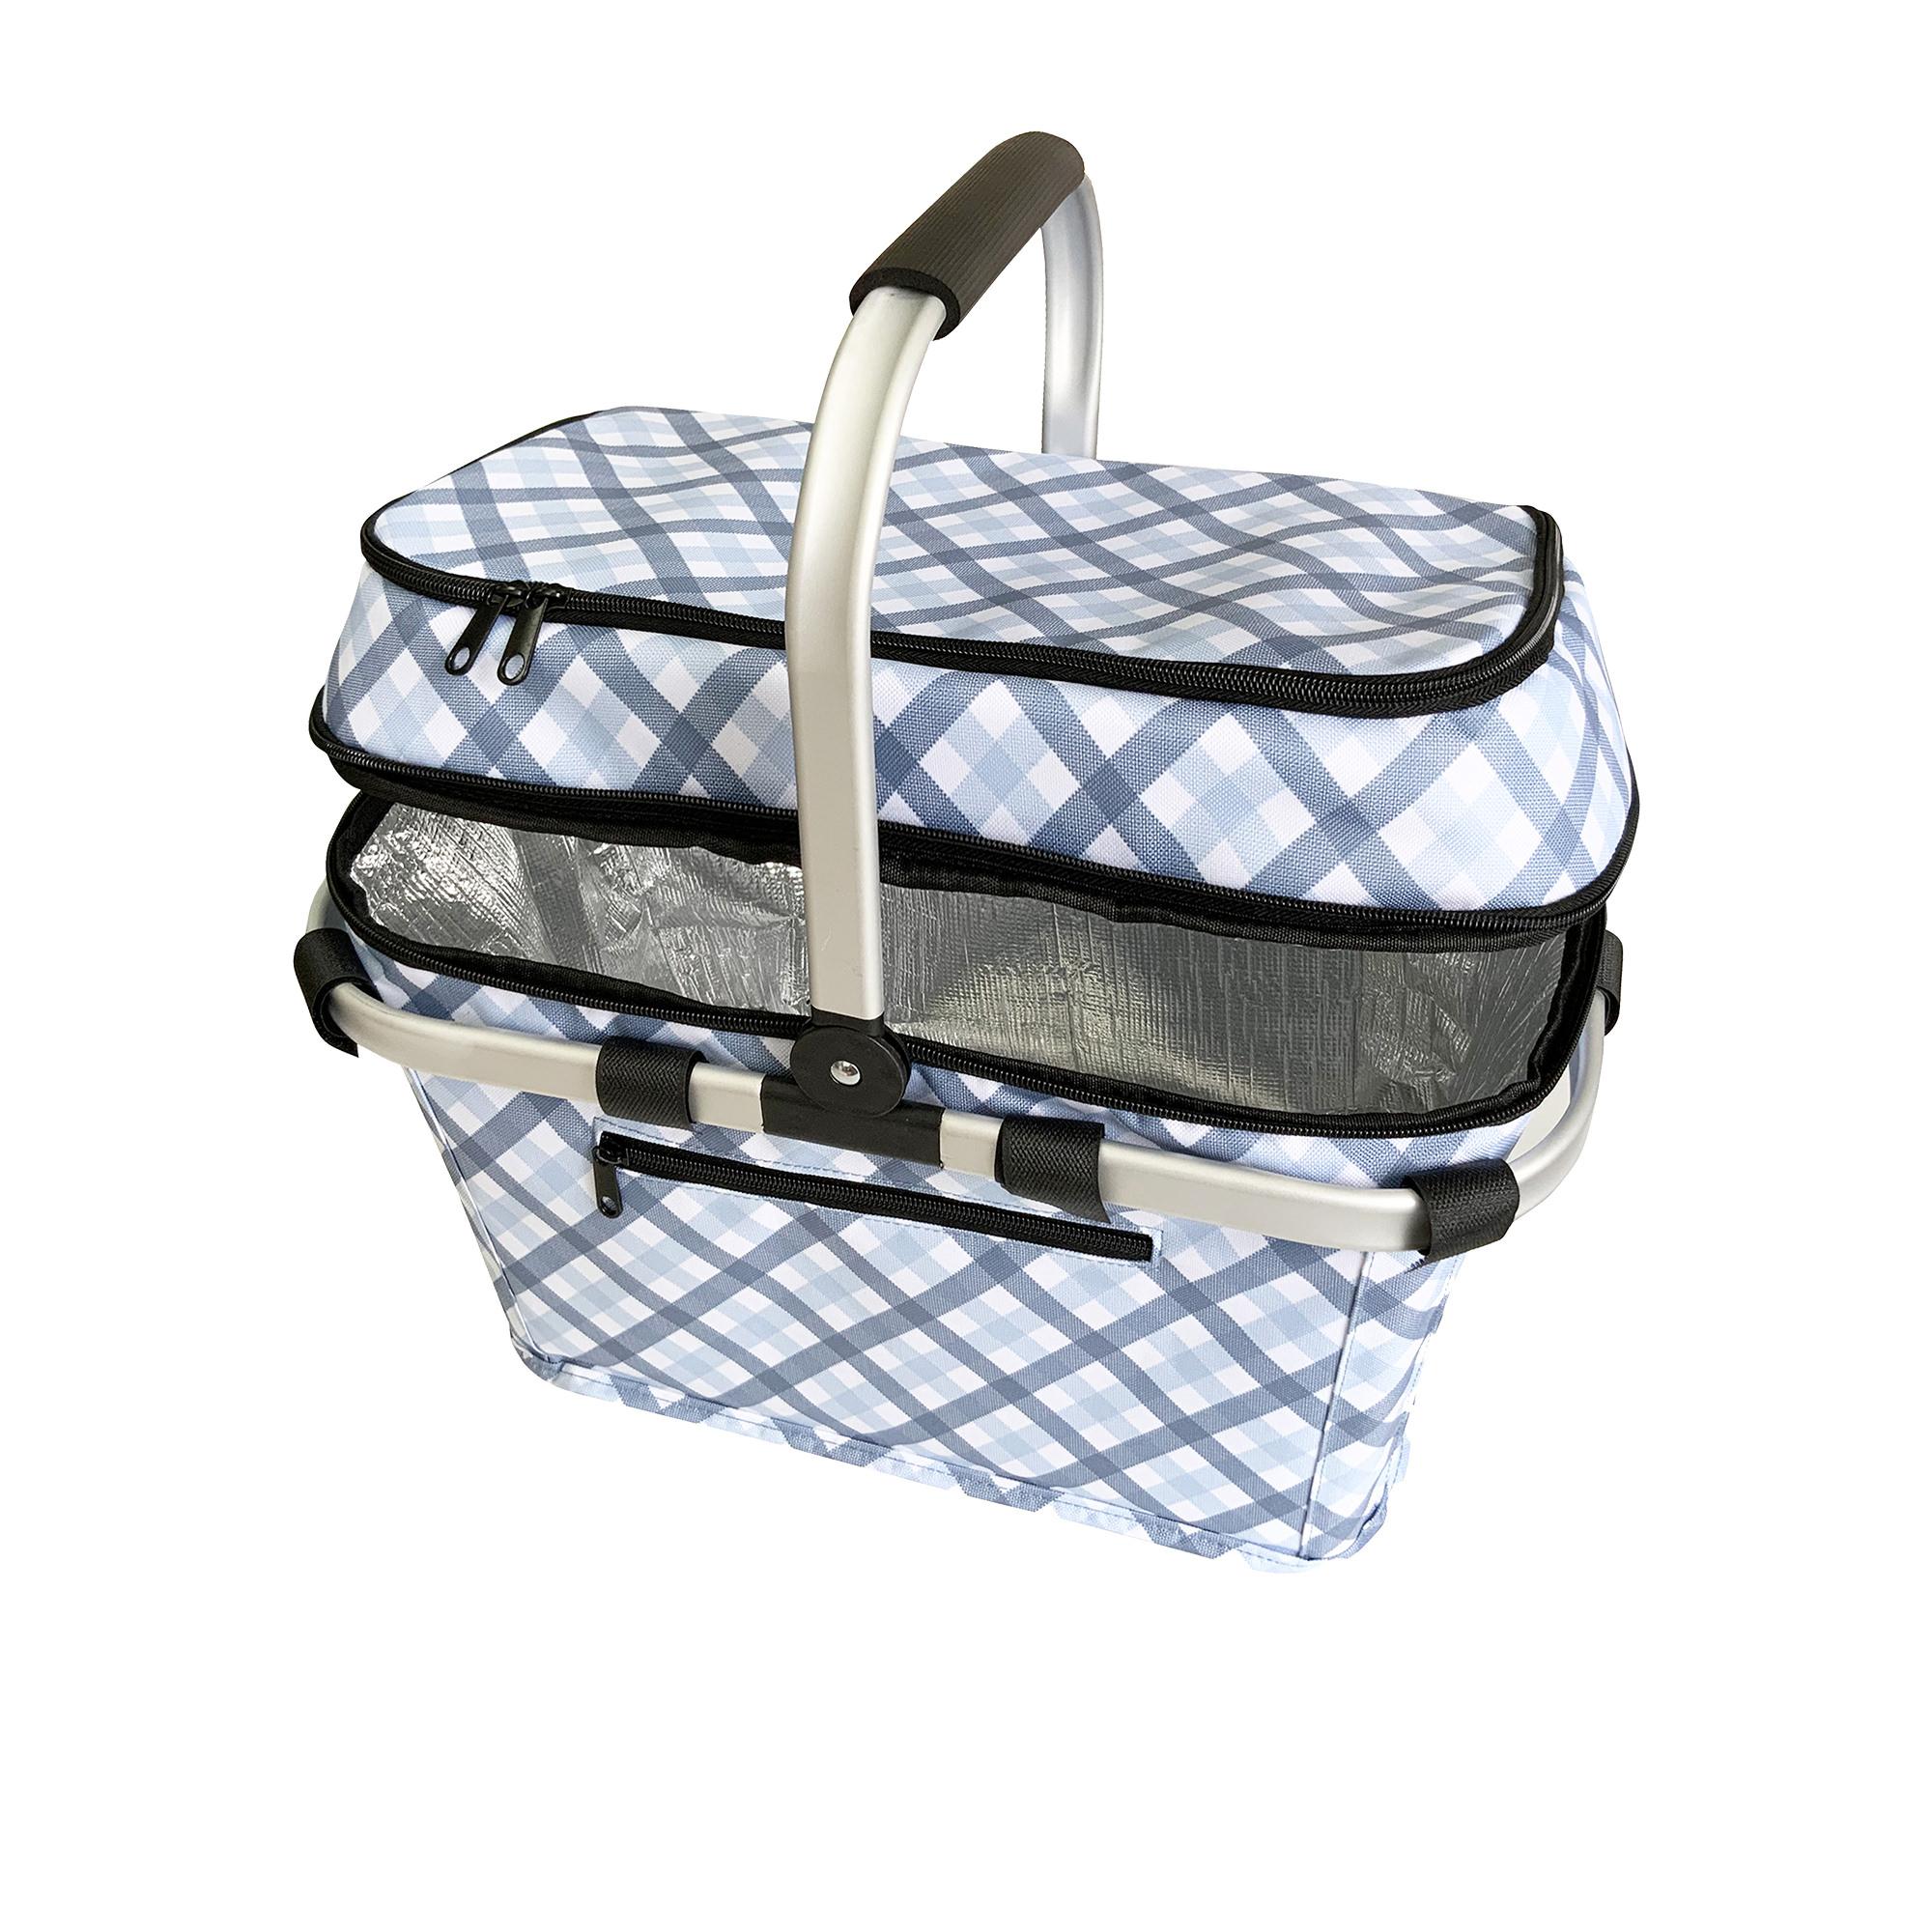 Sachi Fabric 4 Person Insulated Picnic Basket Blue Gingham Image 2